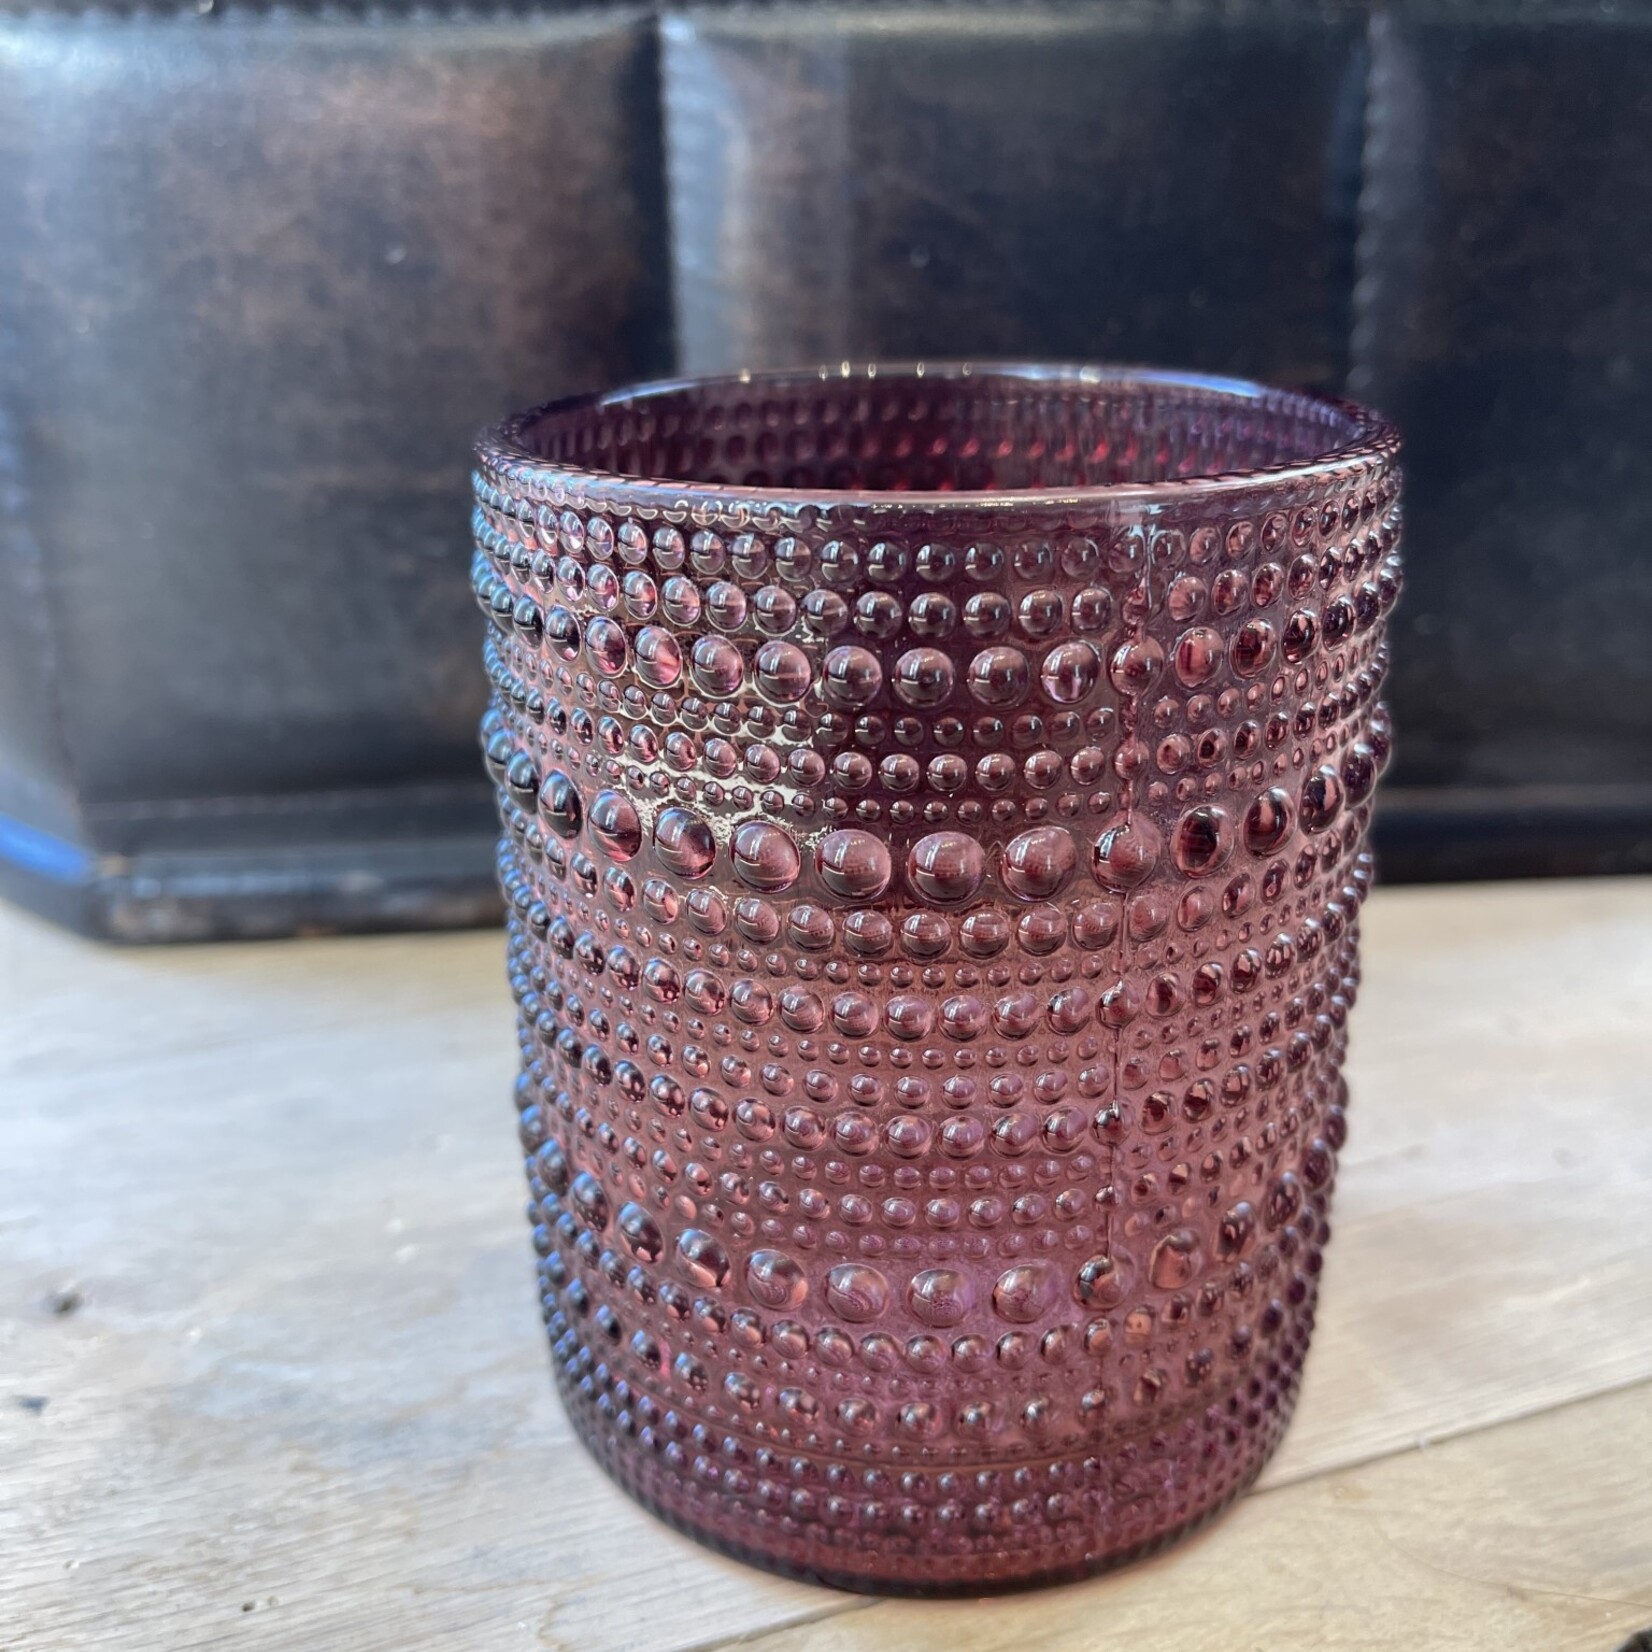 The Wine Savent 10oz Hobnail Beaded Drinking Glasses